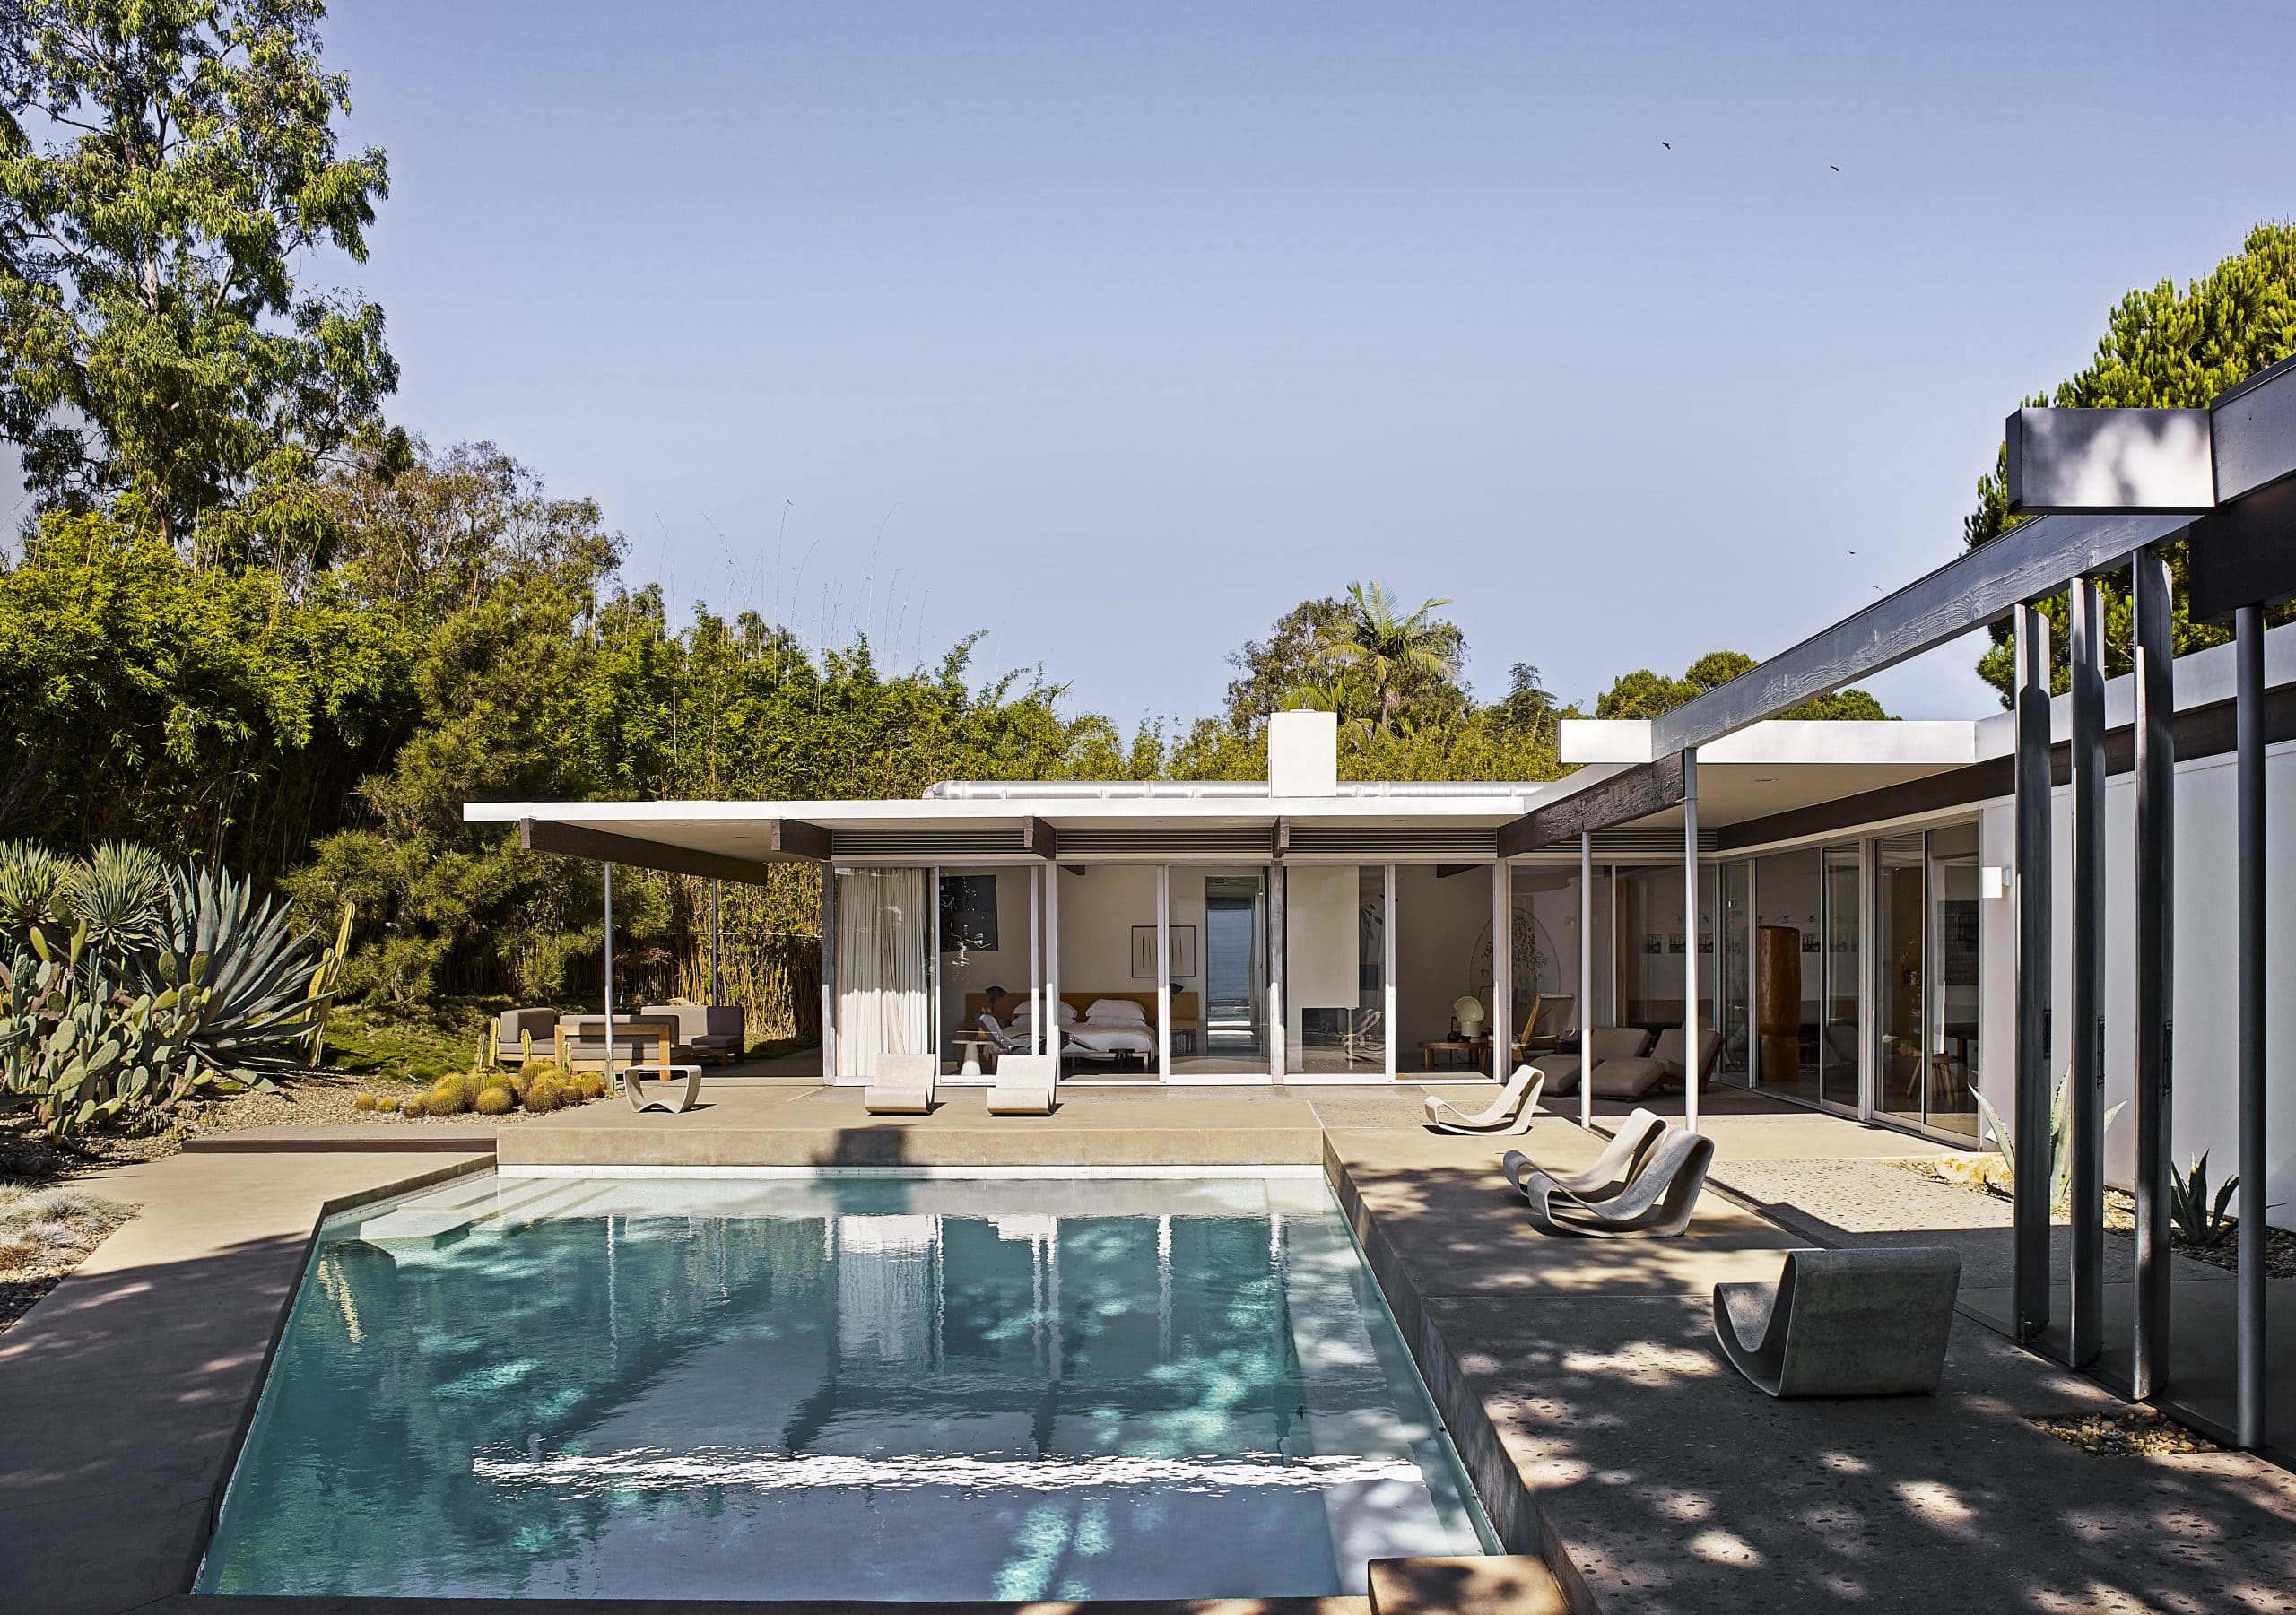 The pool courtyard of the Neutra Levit House in Los Angeles